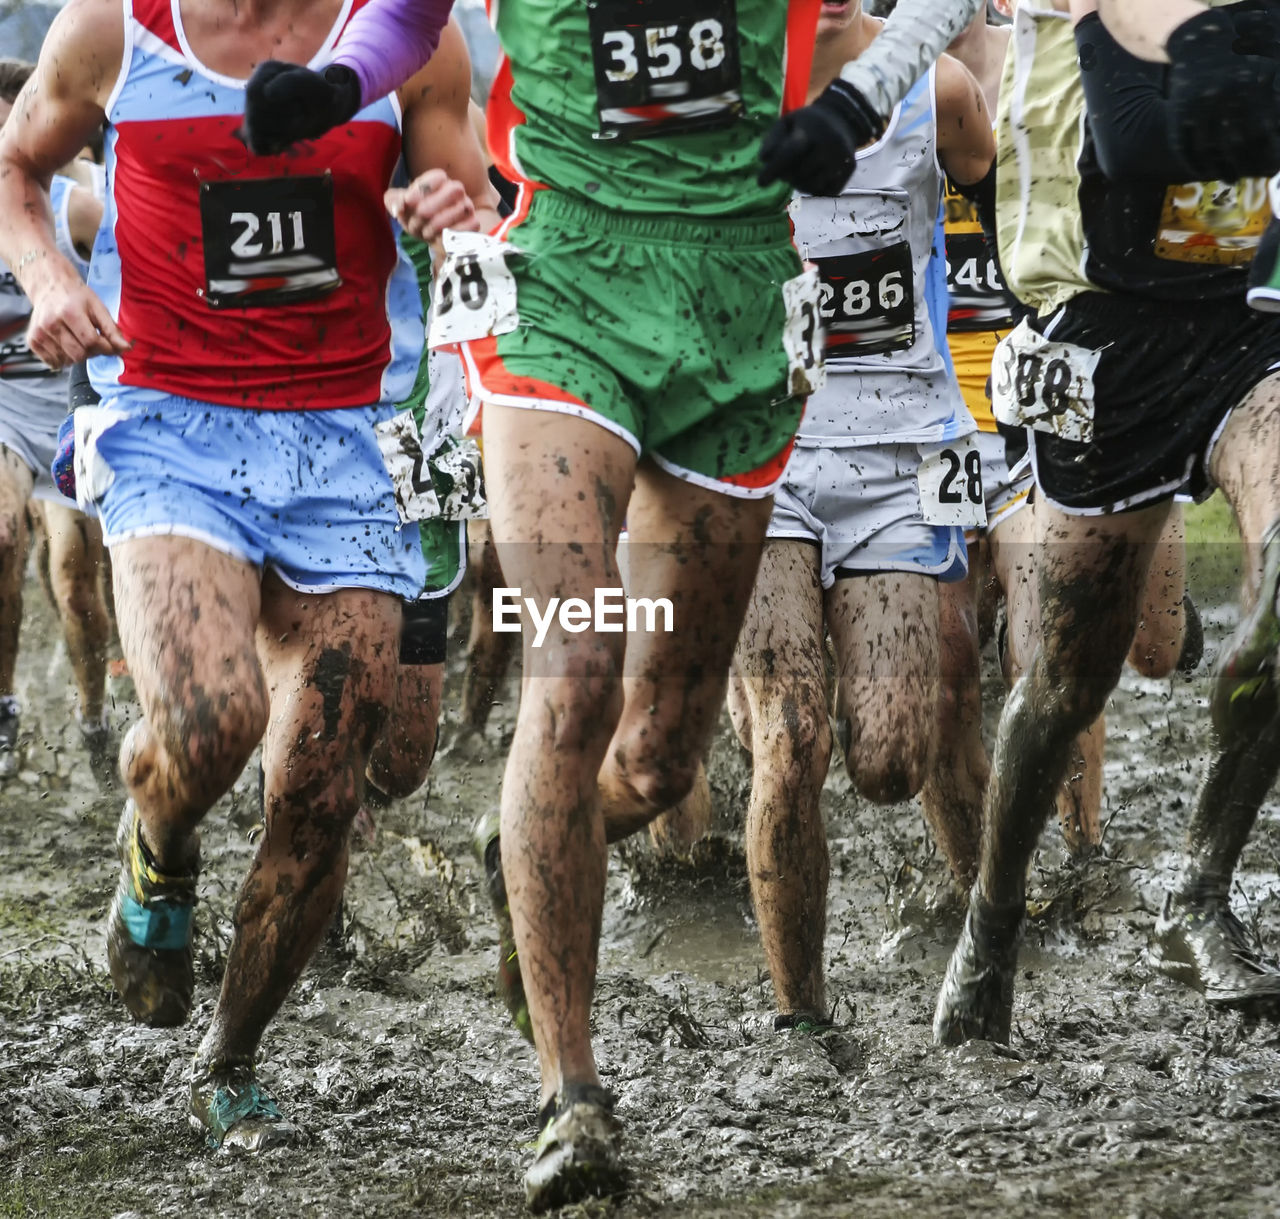 Runners racing a high school championship 5k in heavy mud with their spikes taped on with duct tape.